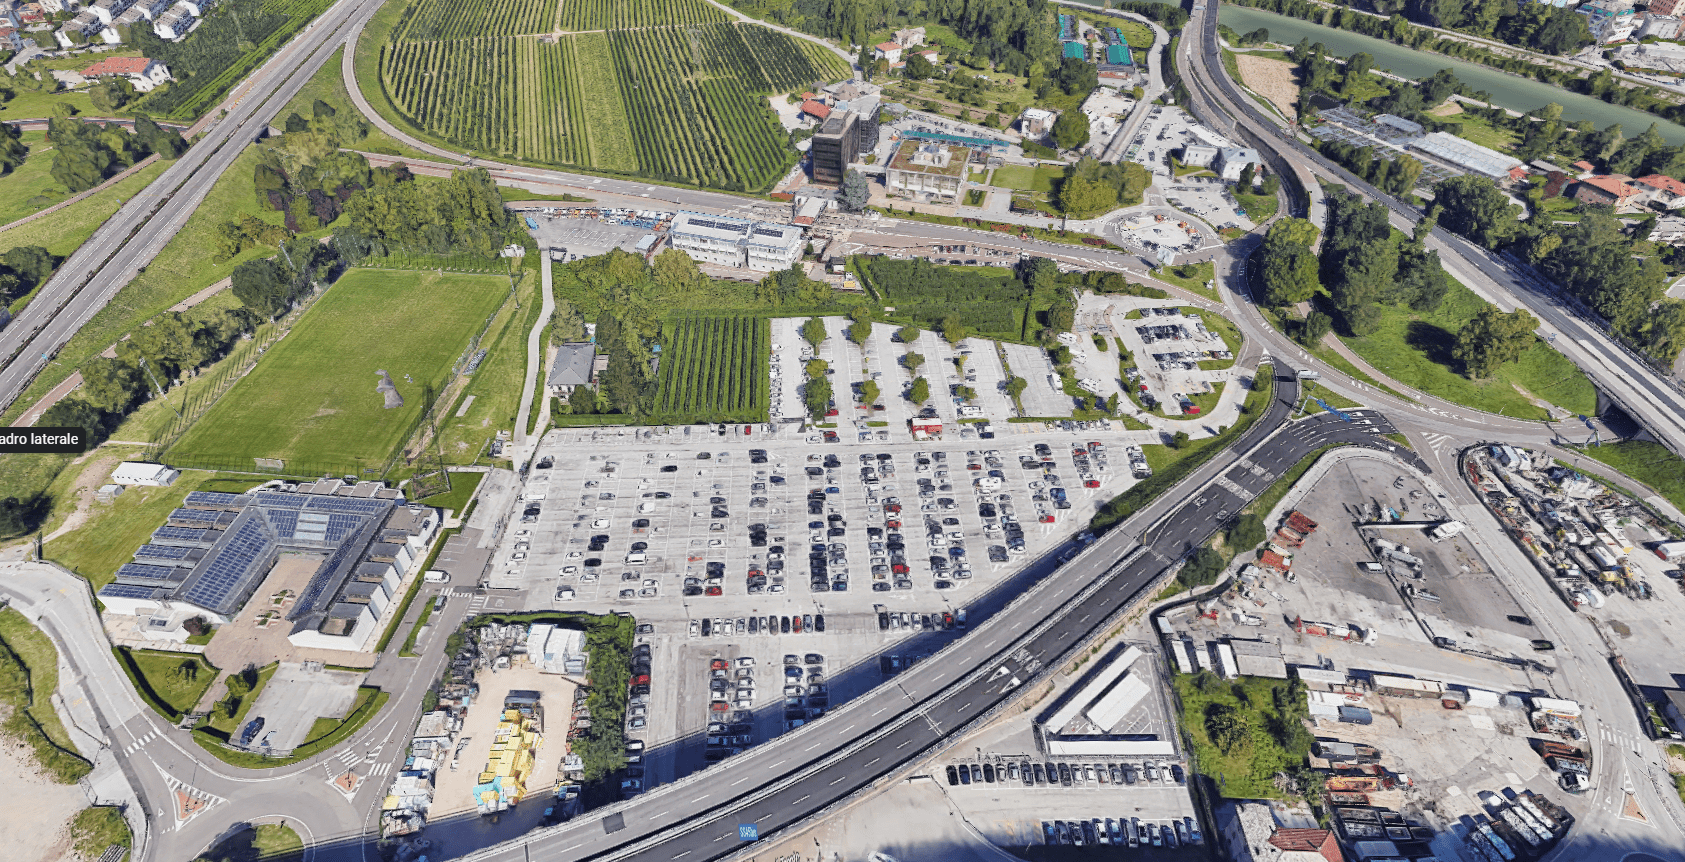 The parking lot that will be redeveloped with a HUB service (area 4). Photo: Habitech DTTN